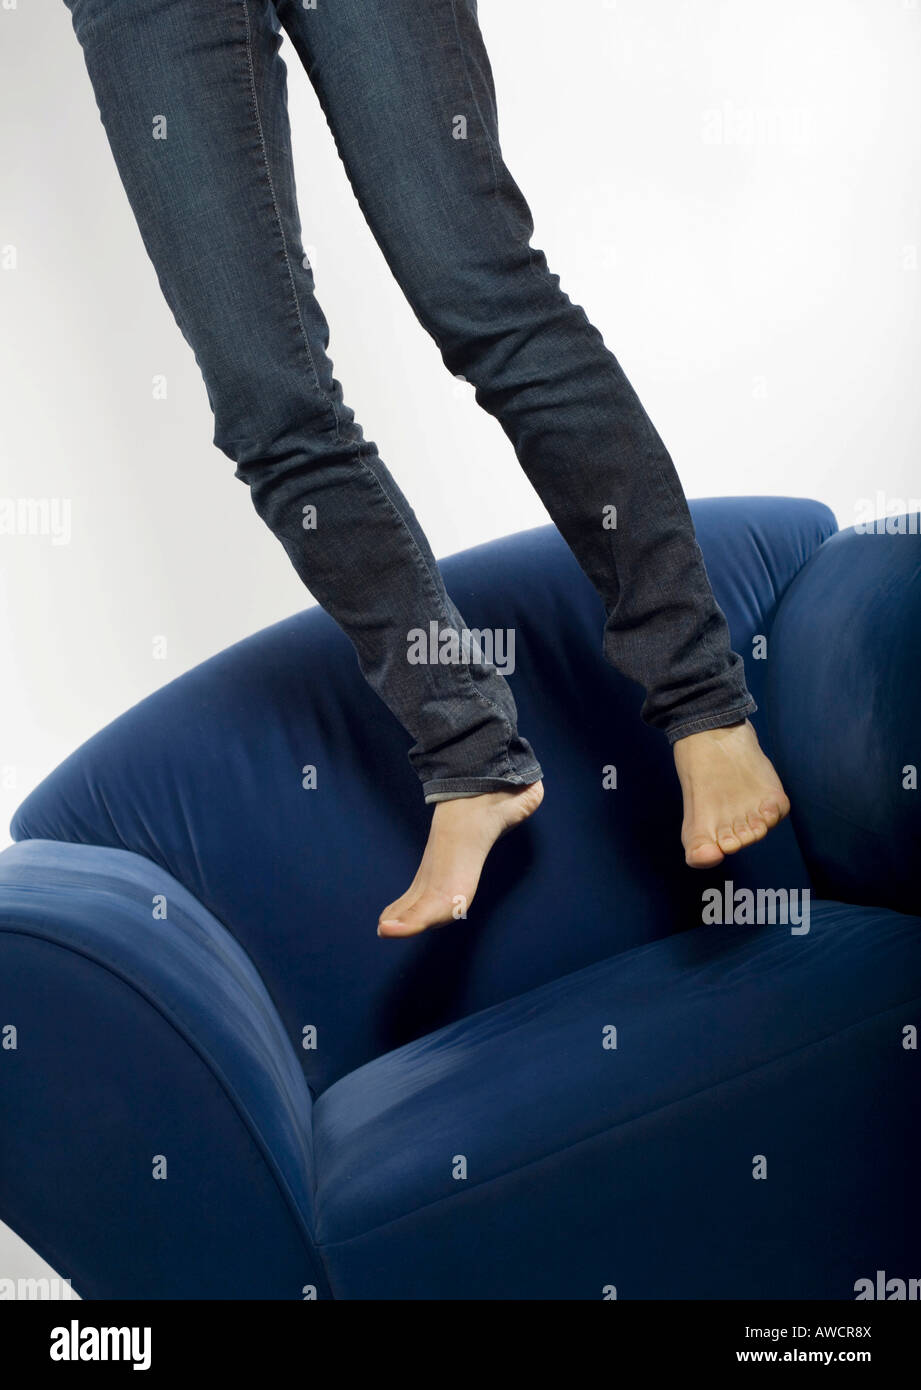 Woman in jeans jumping barefooted on a blue armchair Stock Photo